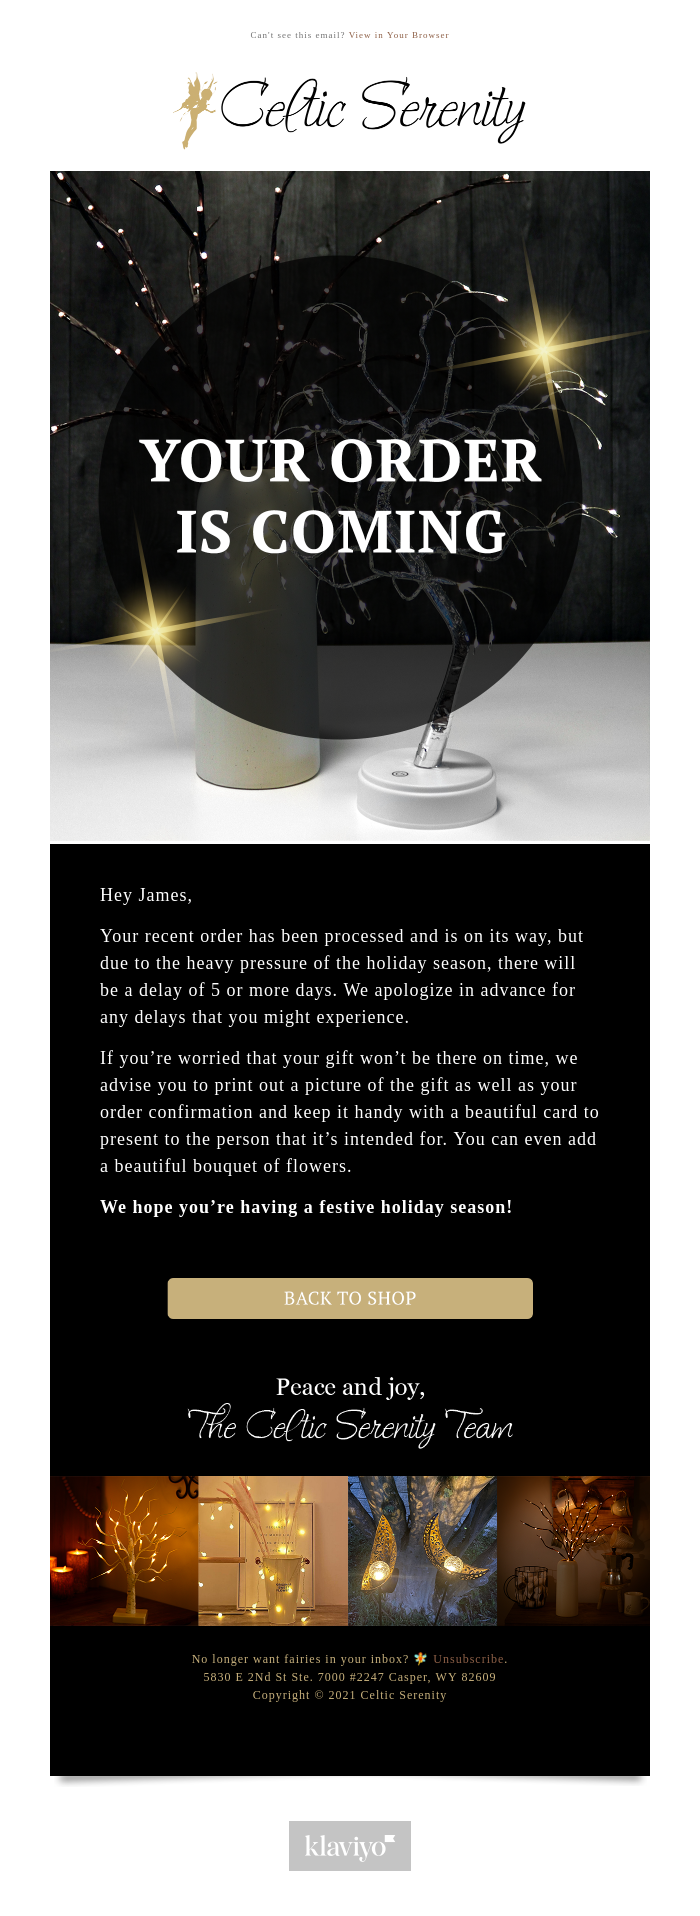 In this shipping confirmation email, they reassure the customer their order is on its way and offer an alternative idea—printing out a picture of the gift with the order confirmation and a card and flowers—in case it doesn’t arrive in time for the holiday.